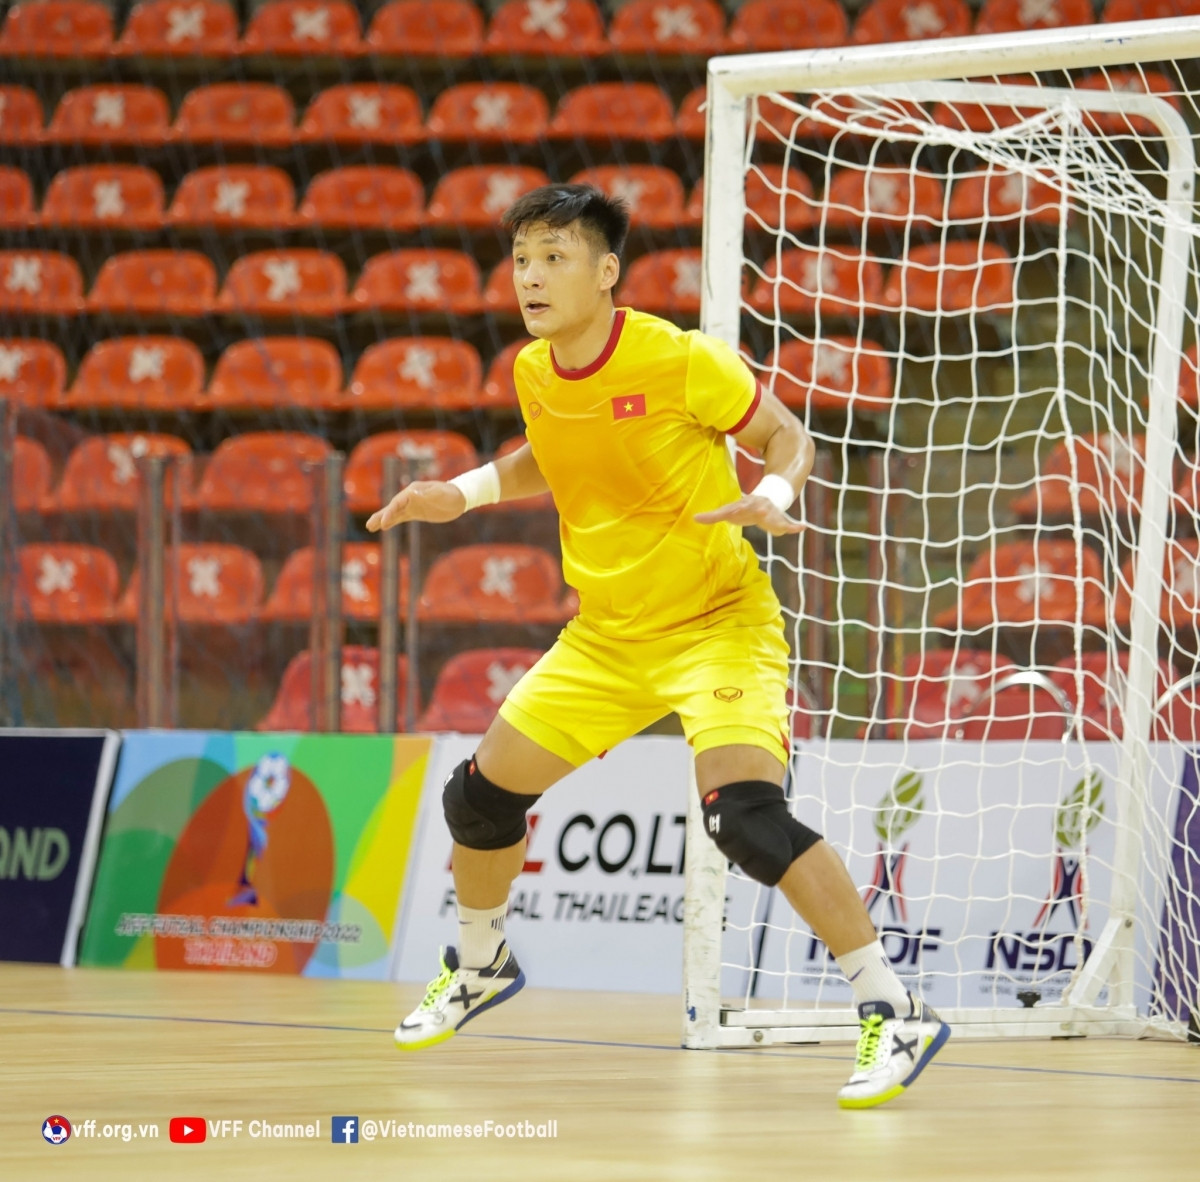 Goalkeeper Ho Van Y becomes the hero in the Vietnam vs Myanmar match as he has blocked two shots in the penalty shootout, securing Vietnam's 4-1 victory and winning a ticket to the 2022 AFC Asian Futsal Cup. ,